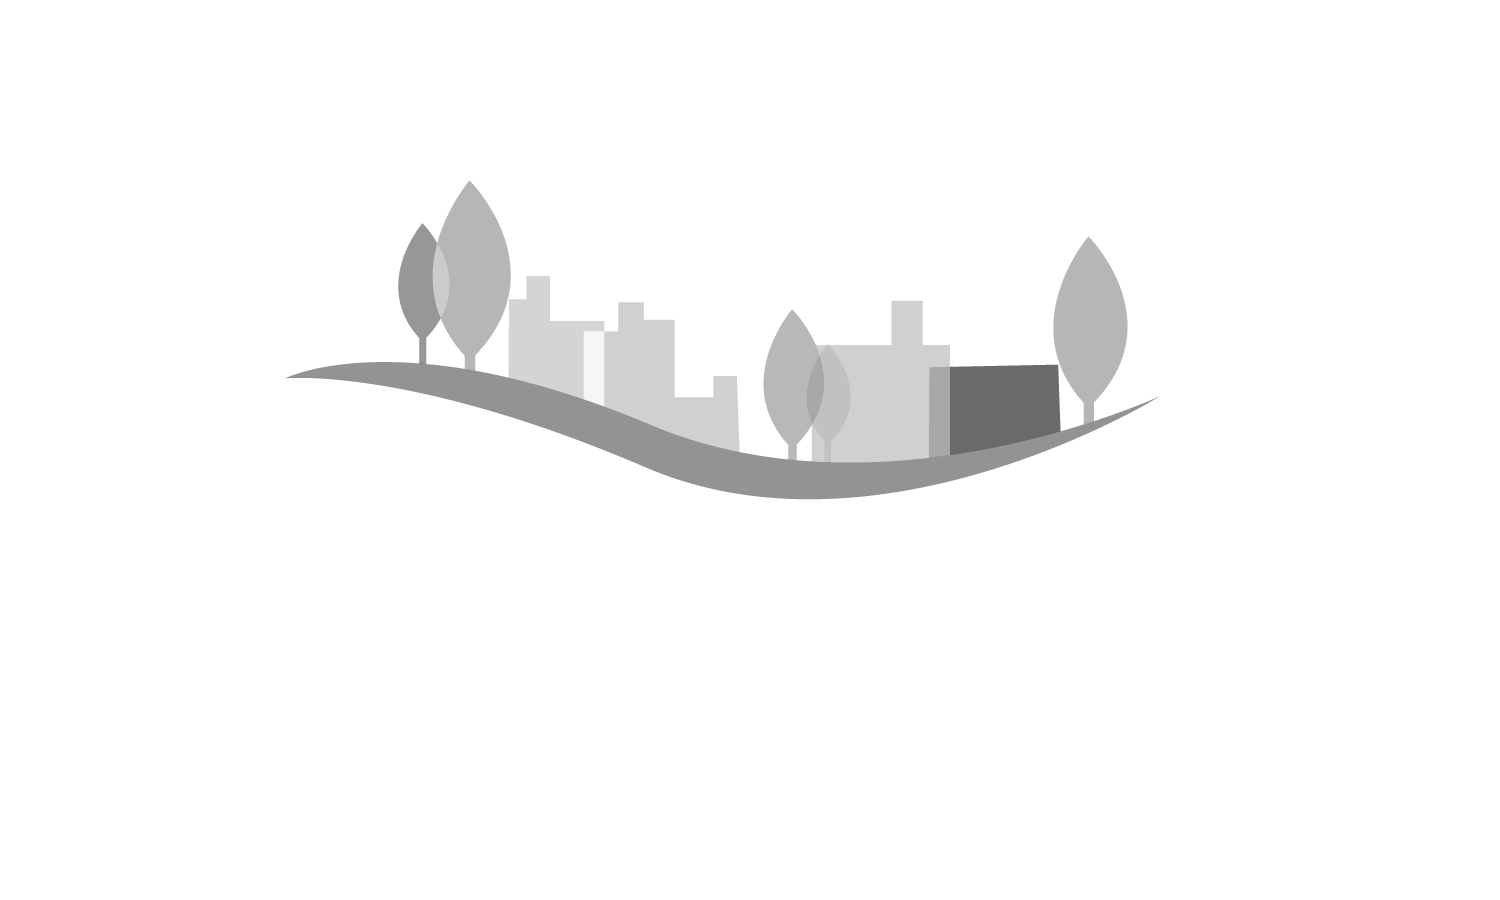 The Heart of the Valley Chamber of Commerce